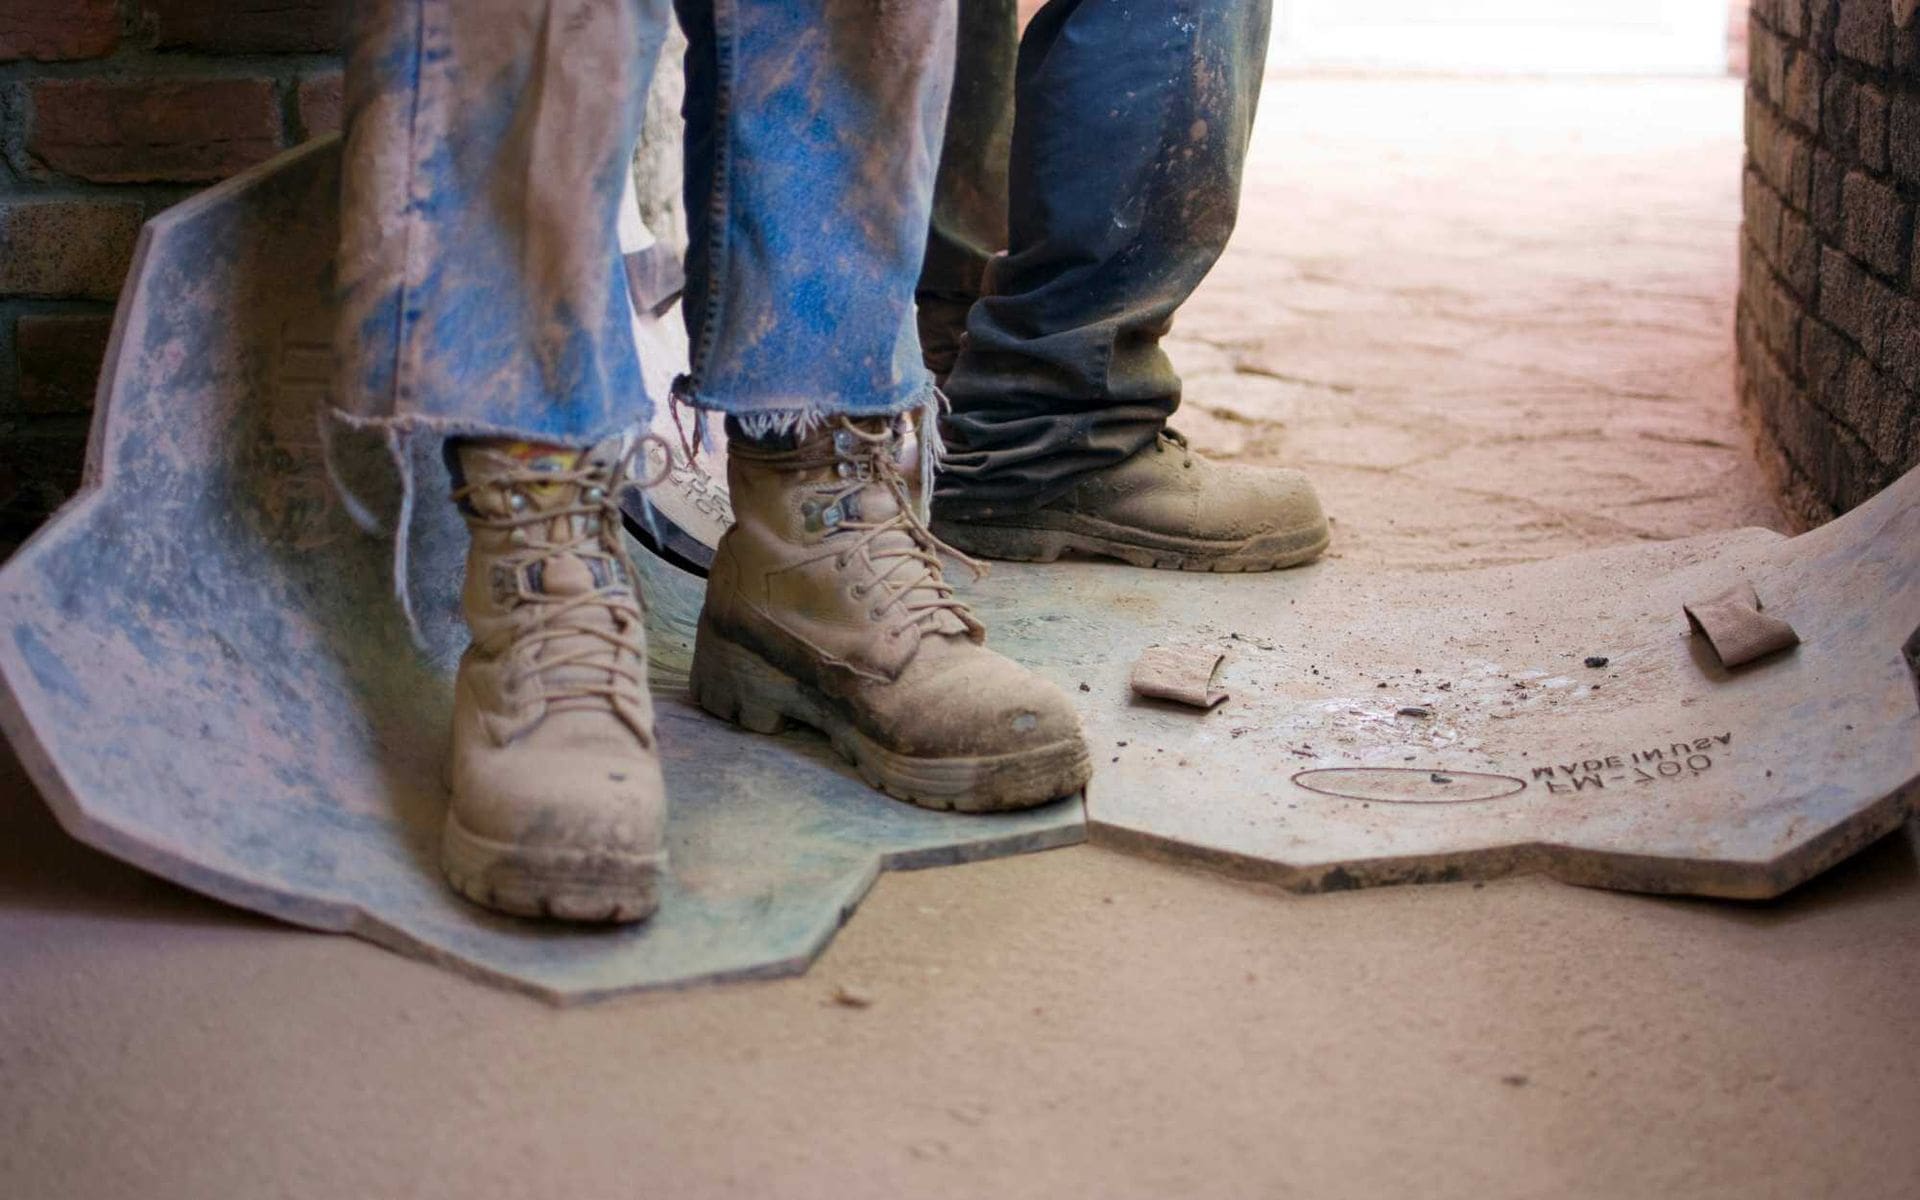 Two people standing on worn-out construction site floor mats in Avondale, AZ. Both are wearing rugged work boots and dirty jeans, with only their feet and lower legs visible. The ground is dusty and cluttered with small debris, reflecting a work-in-progress environment for concrete contractors.